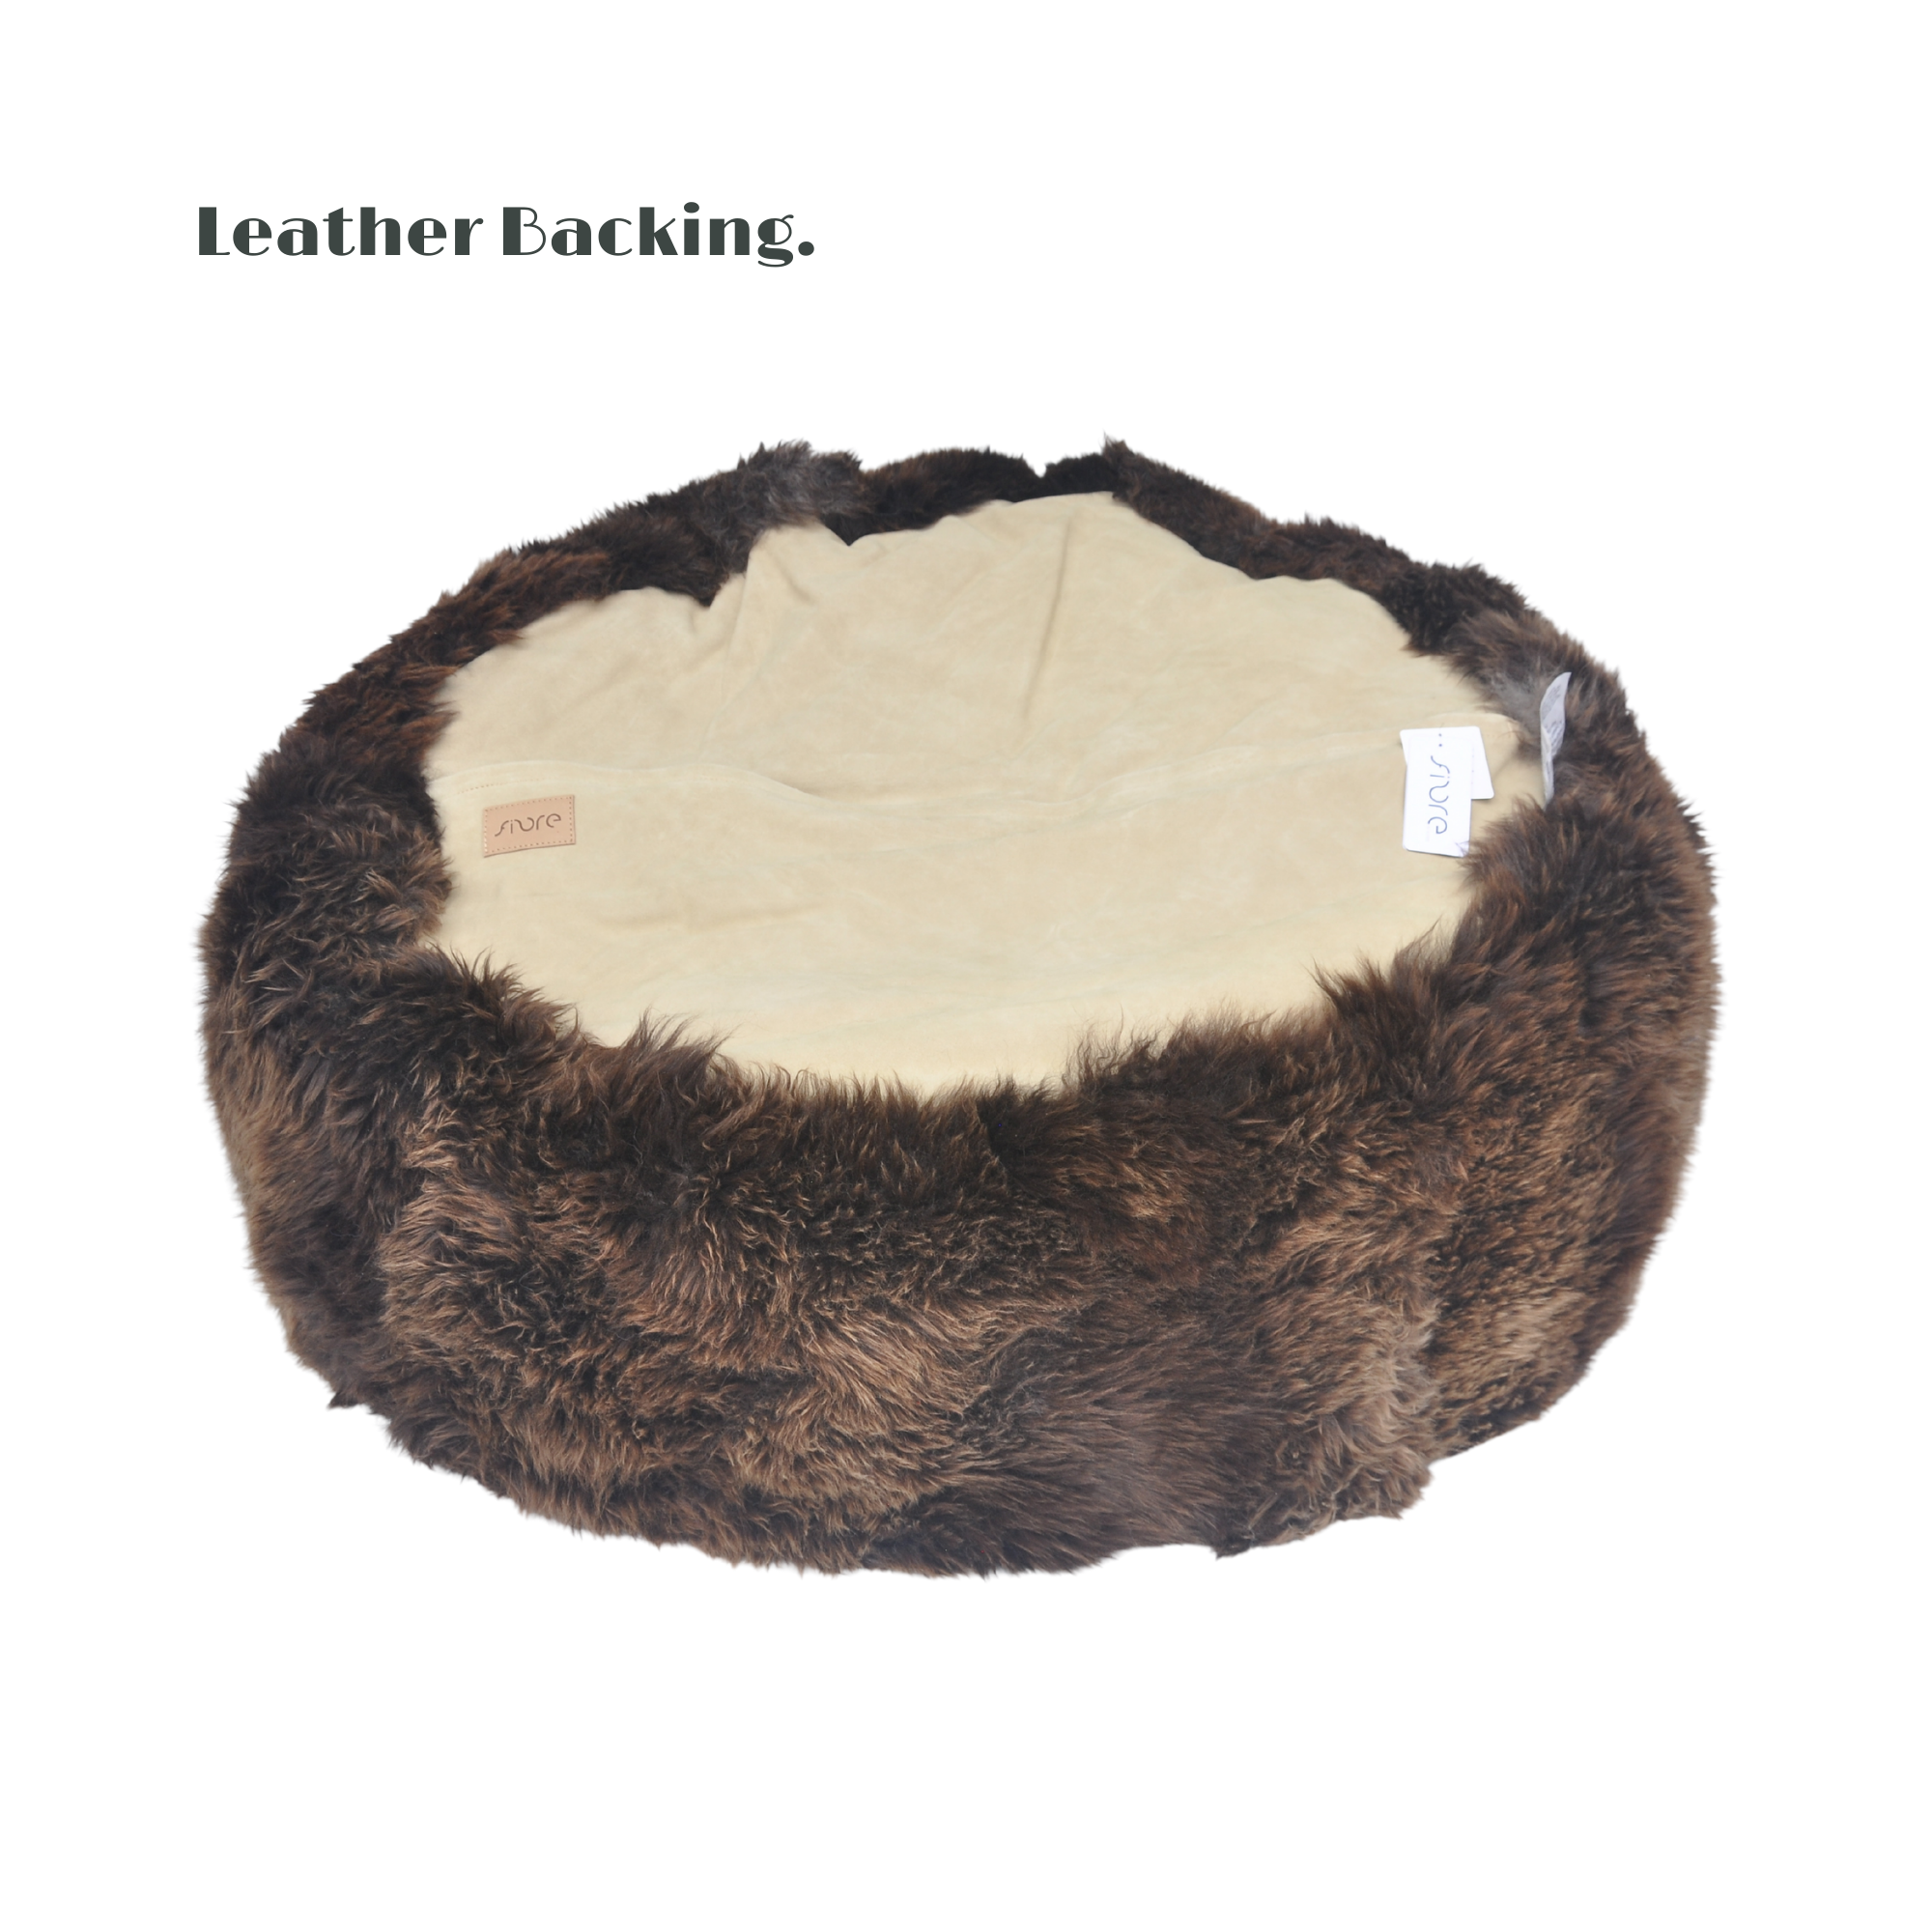 Underside of a Long Wool Sheepskin Bean Bag • Natural Brown wool. Base is covered with beige suede and a zip closure.